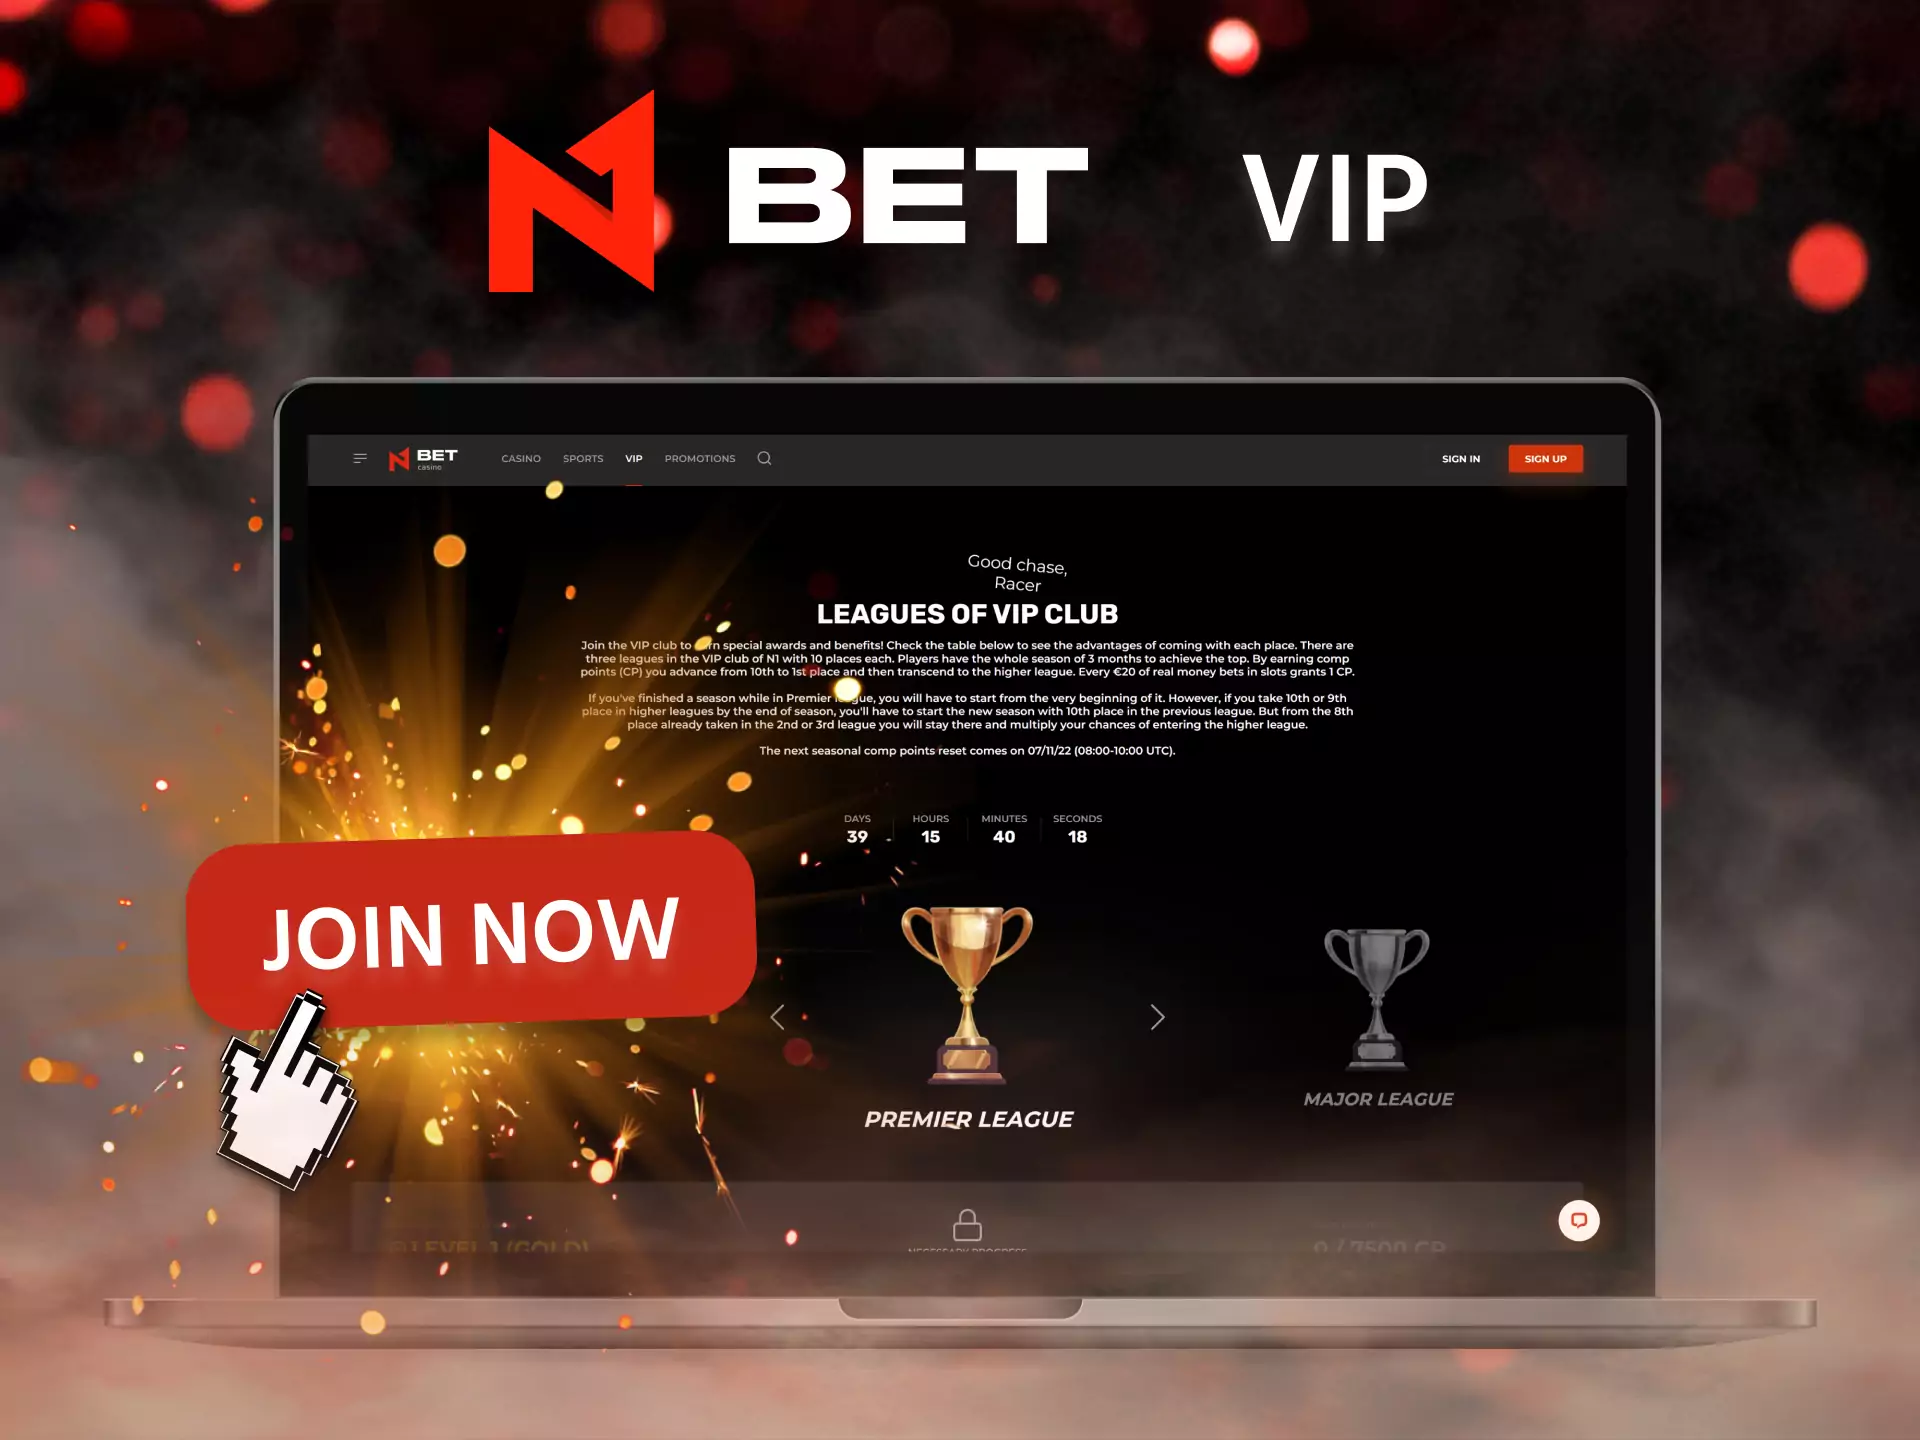 Join the VIP N1Bet program and get many benefits.